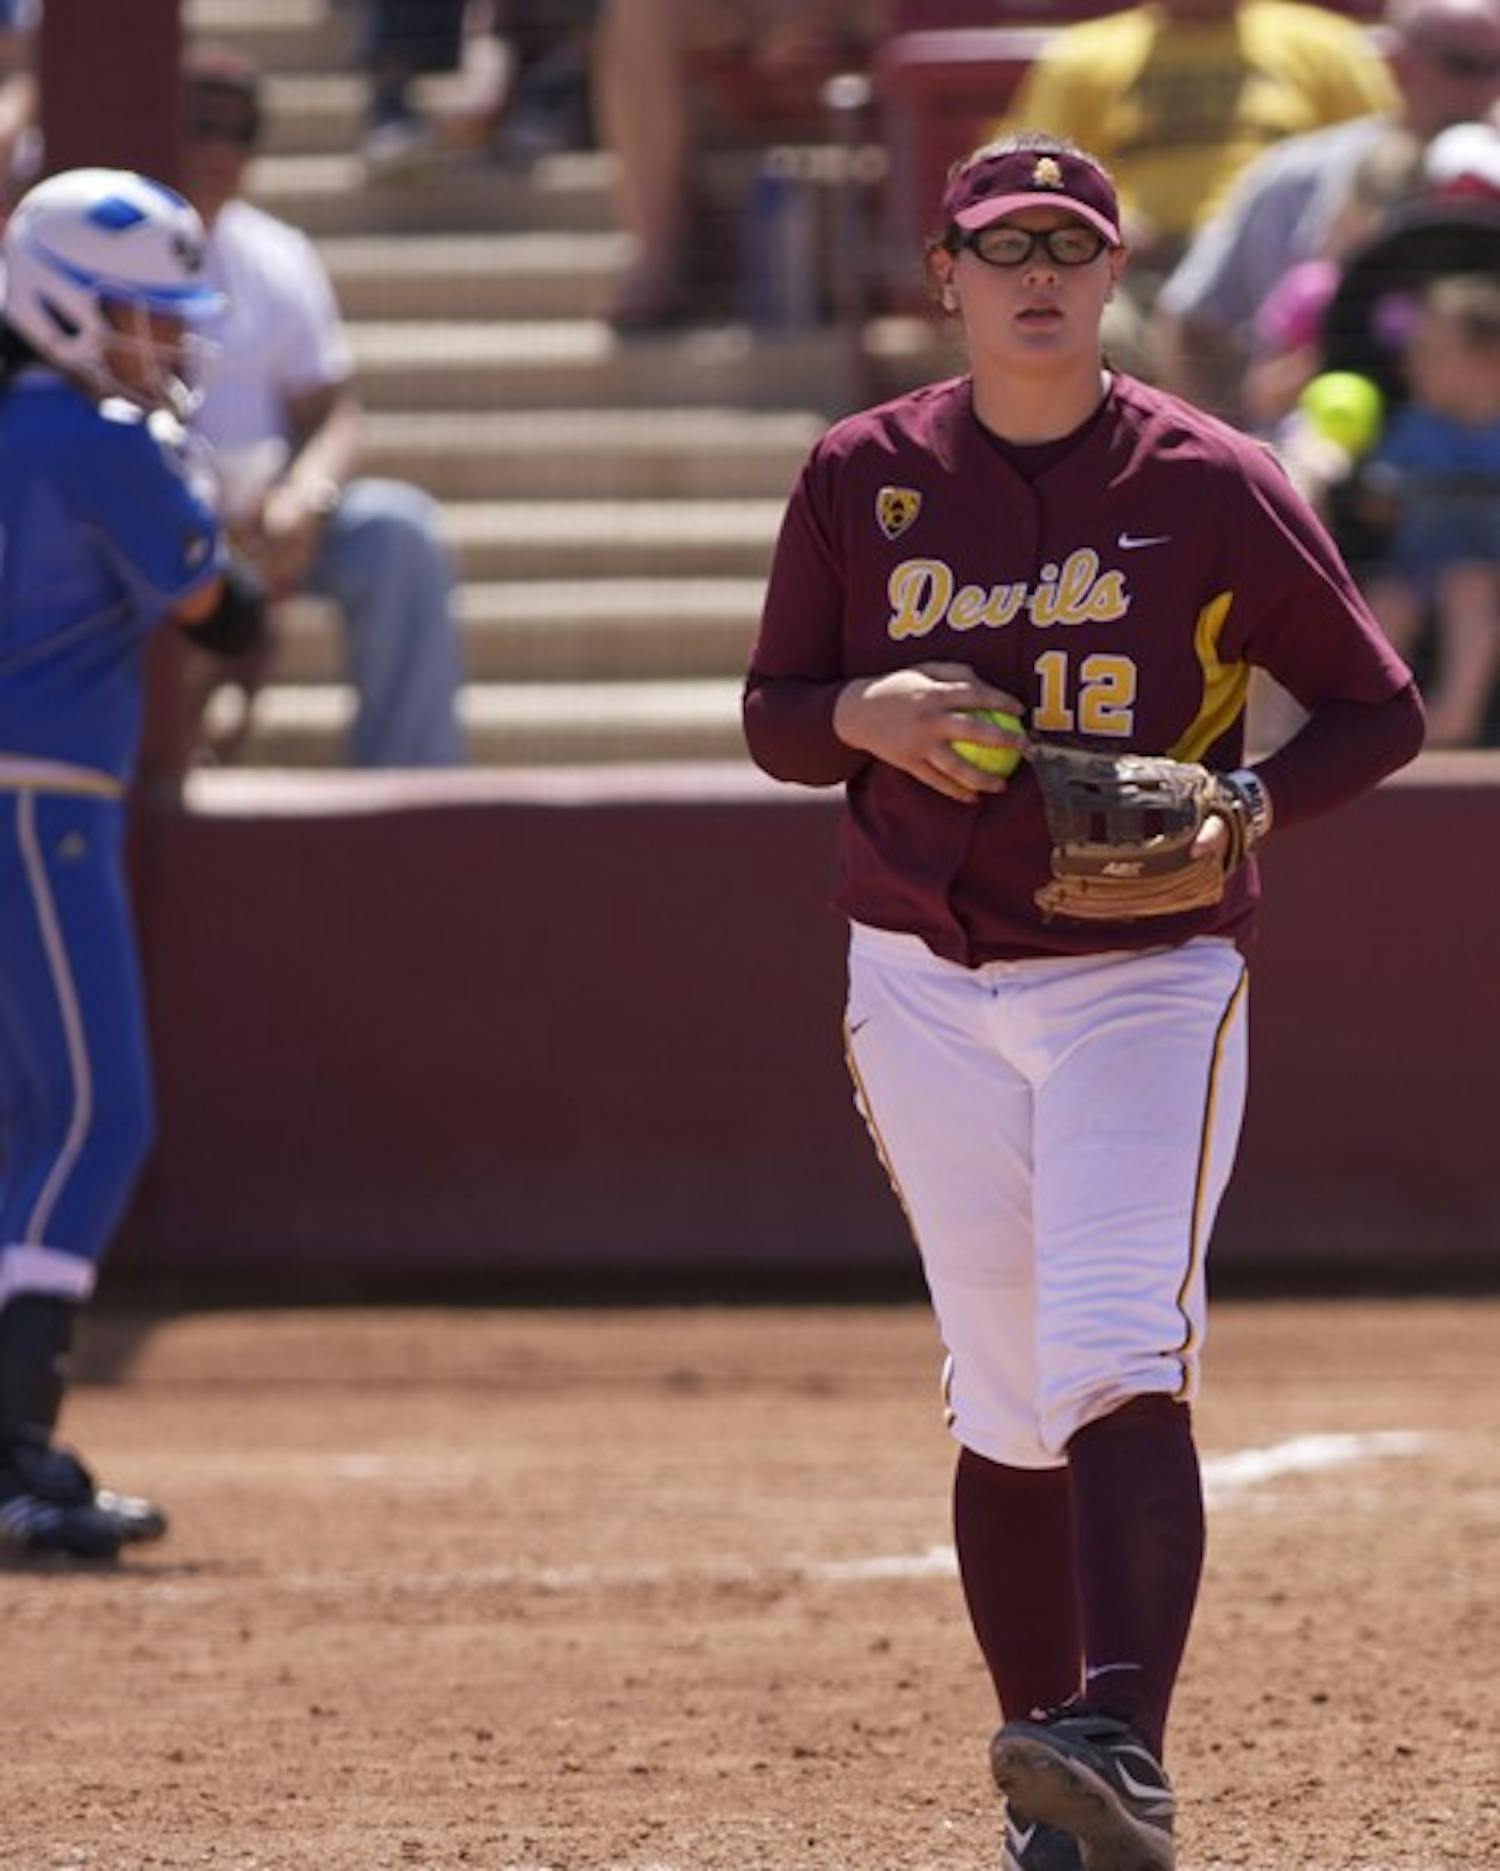 Tough crowd: ASU senior Kaylyn Castillo watches a pitch on the outside during the Sun Devils’ 5-0 win over UCLA.  On Thursday ASU heads to Tucson and Hillenbrand Stadium, where the team has only won once in the last 20 seasons. (Photo by Scott Stuk)